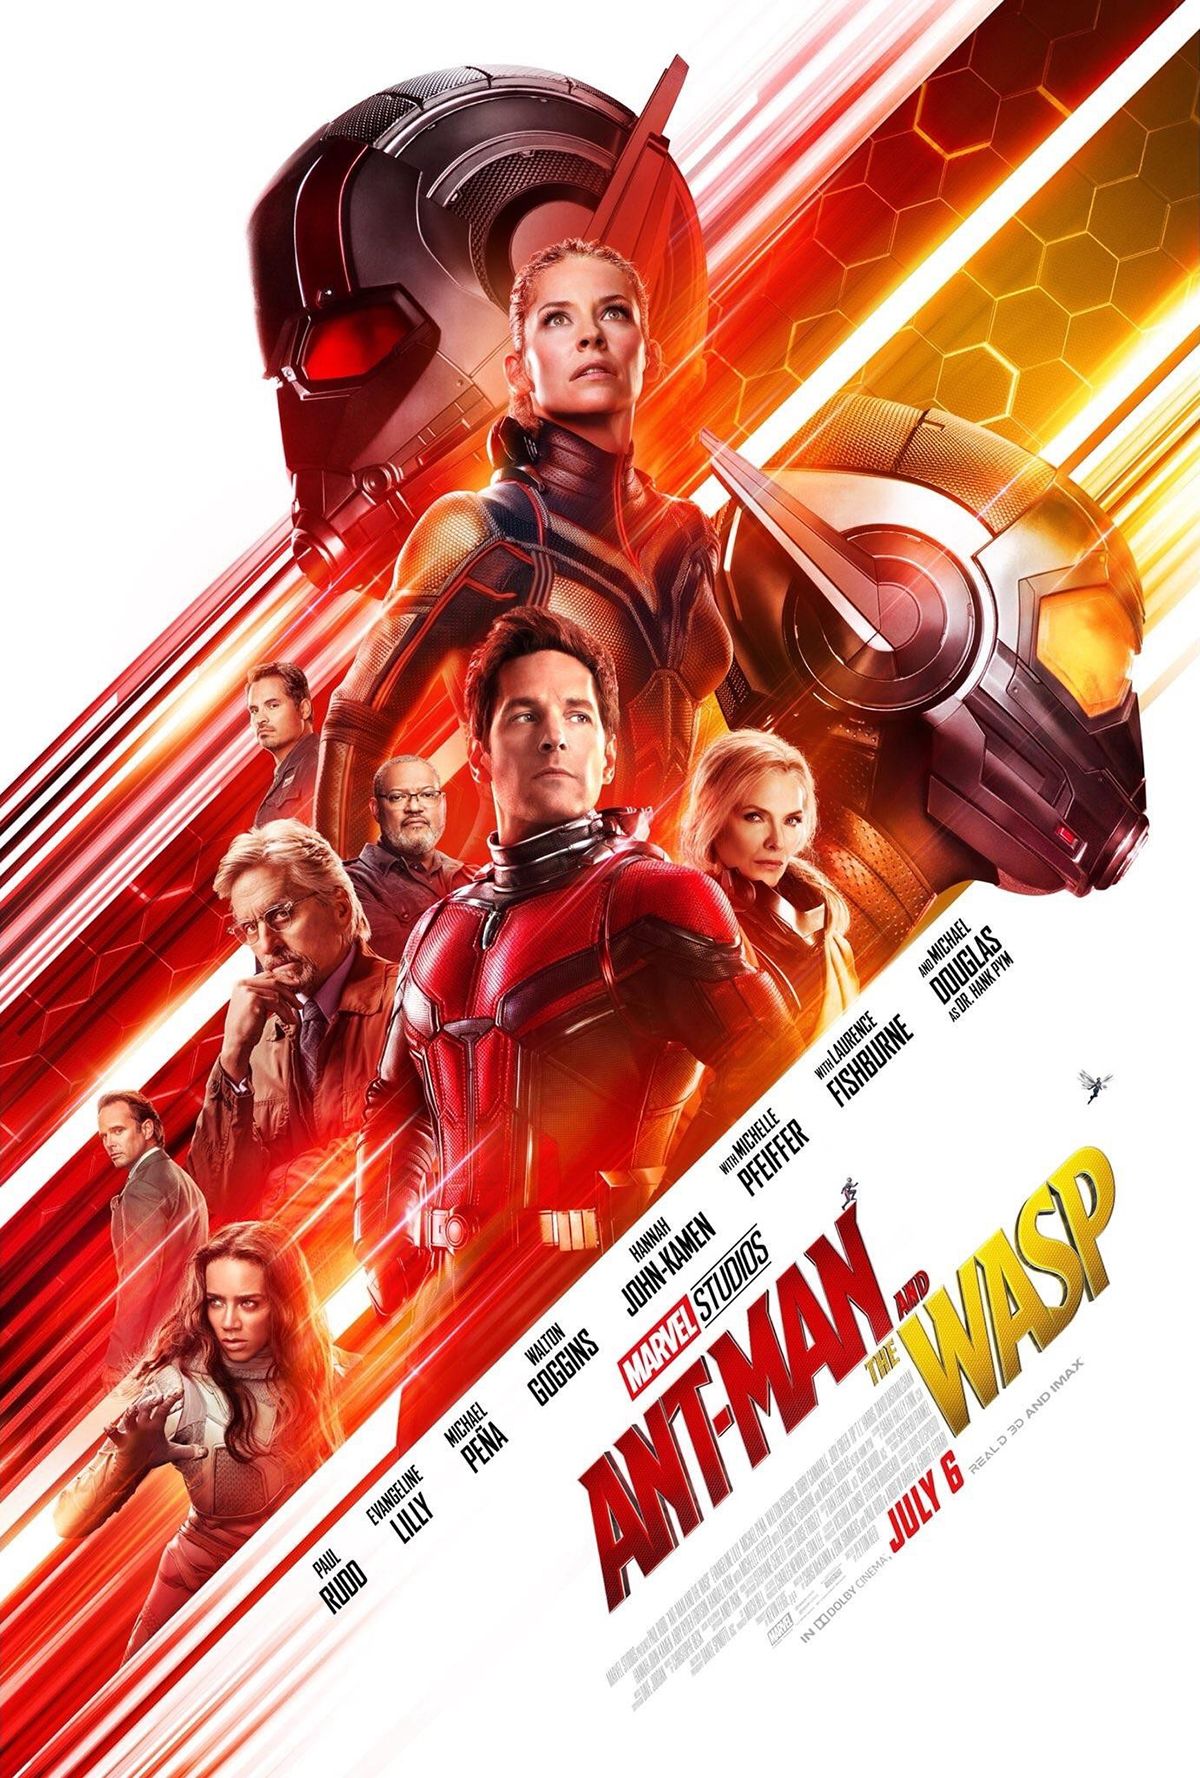 Antman and The Wasp